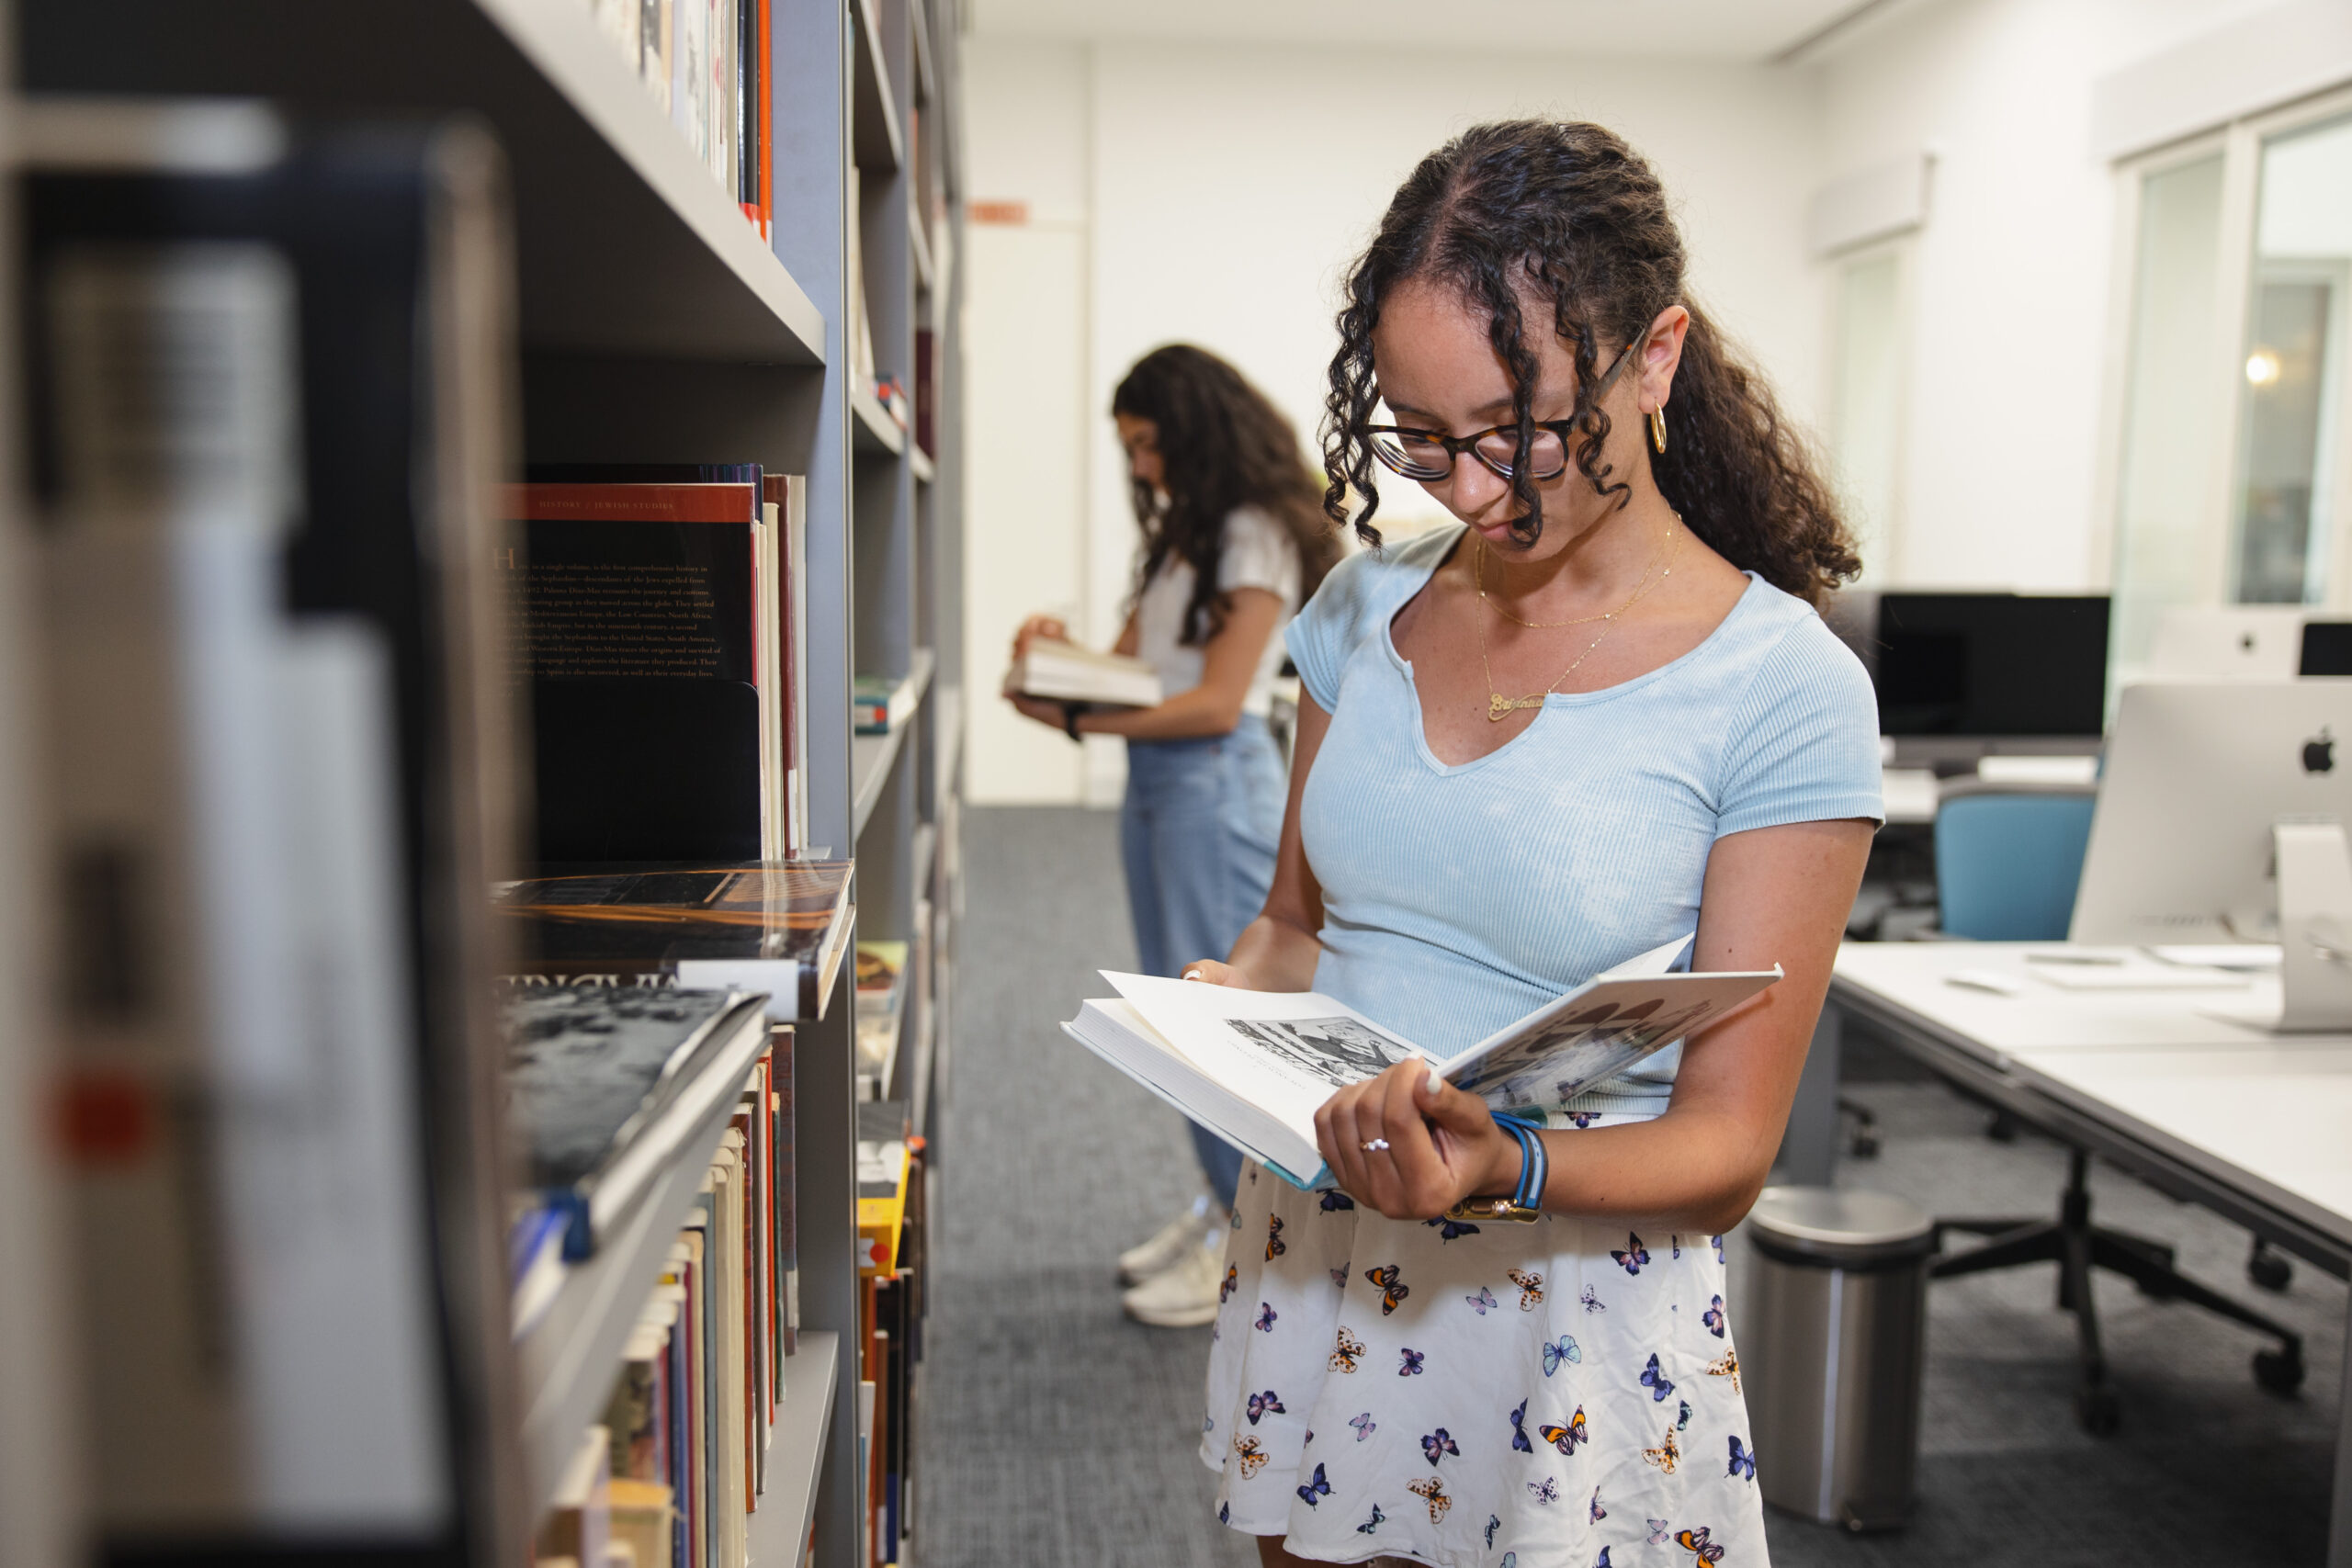 A female-presenting student browsing a book in a library.